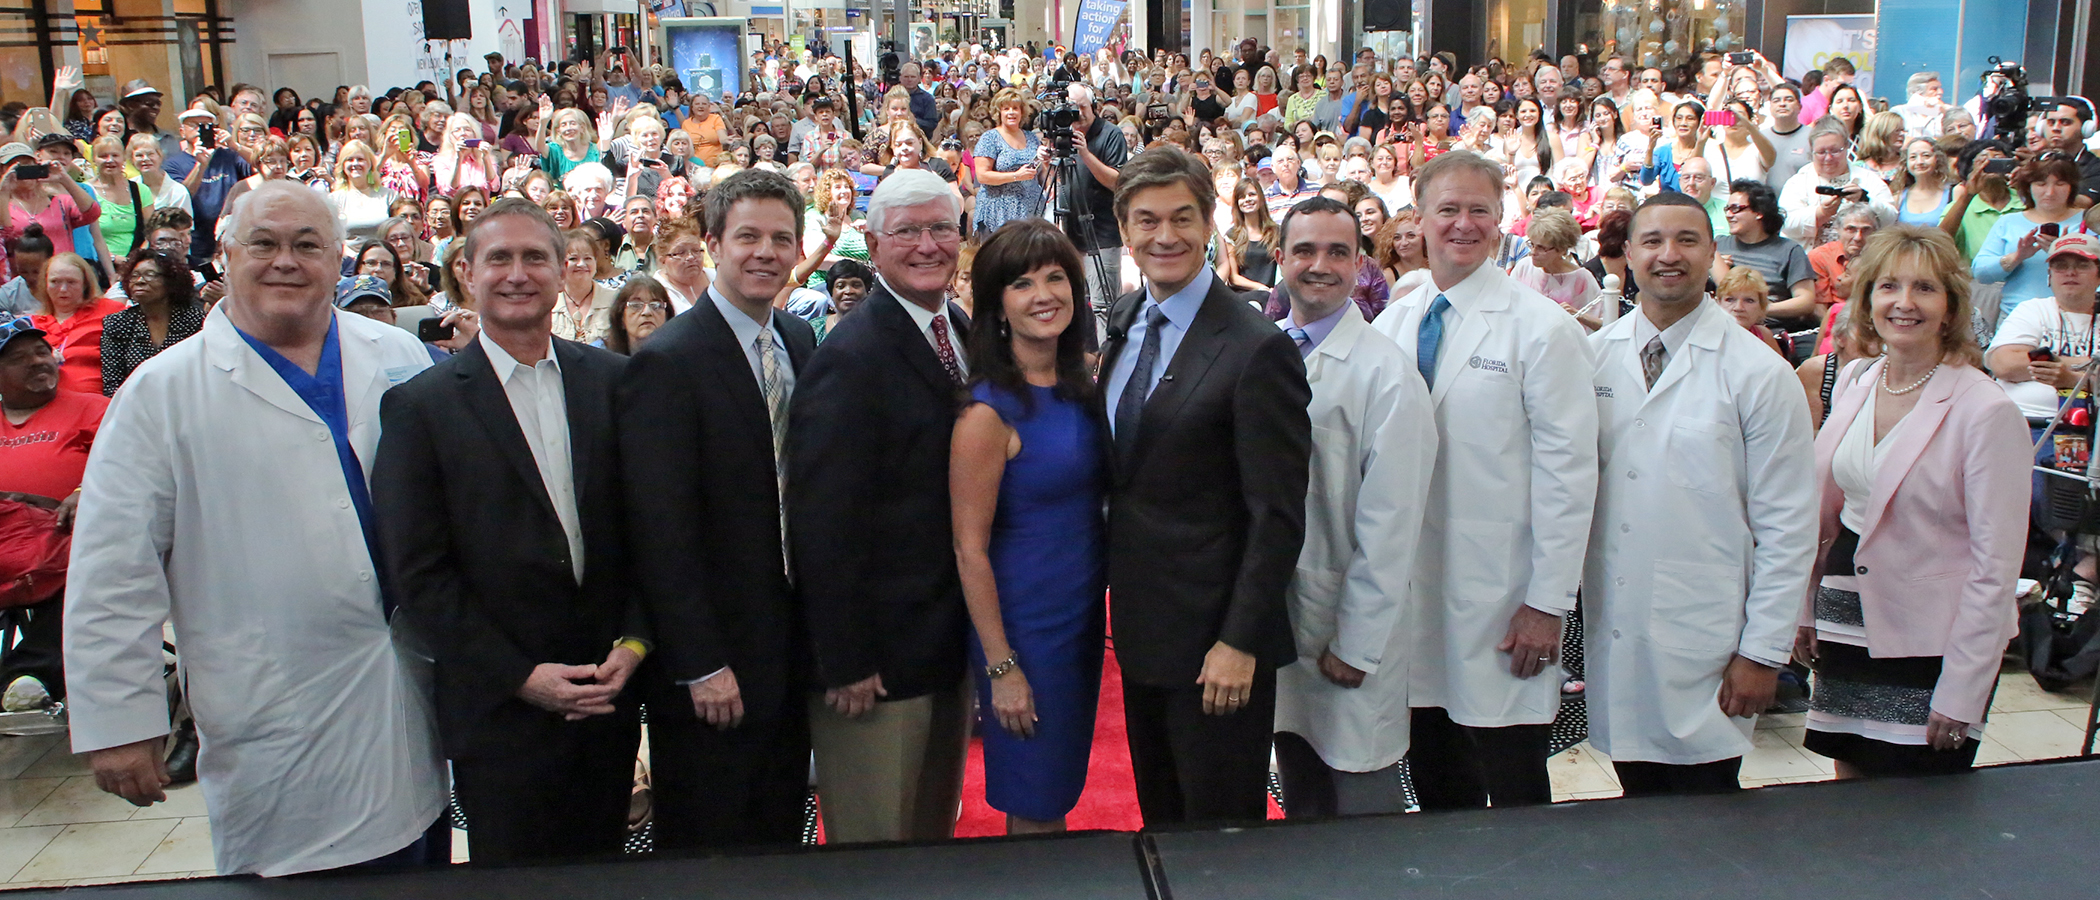 Florida Hospital Welcomes Dr. Oz to Tampa and Invites the ...